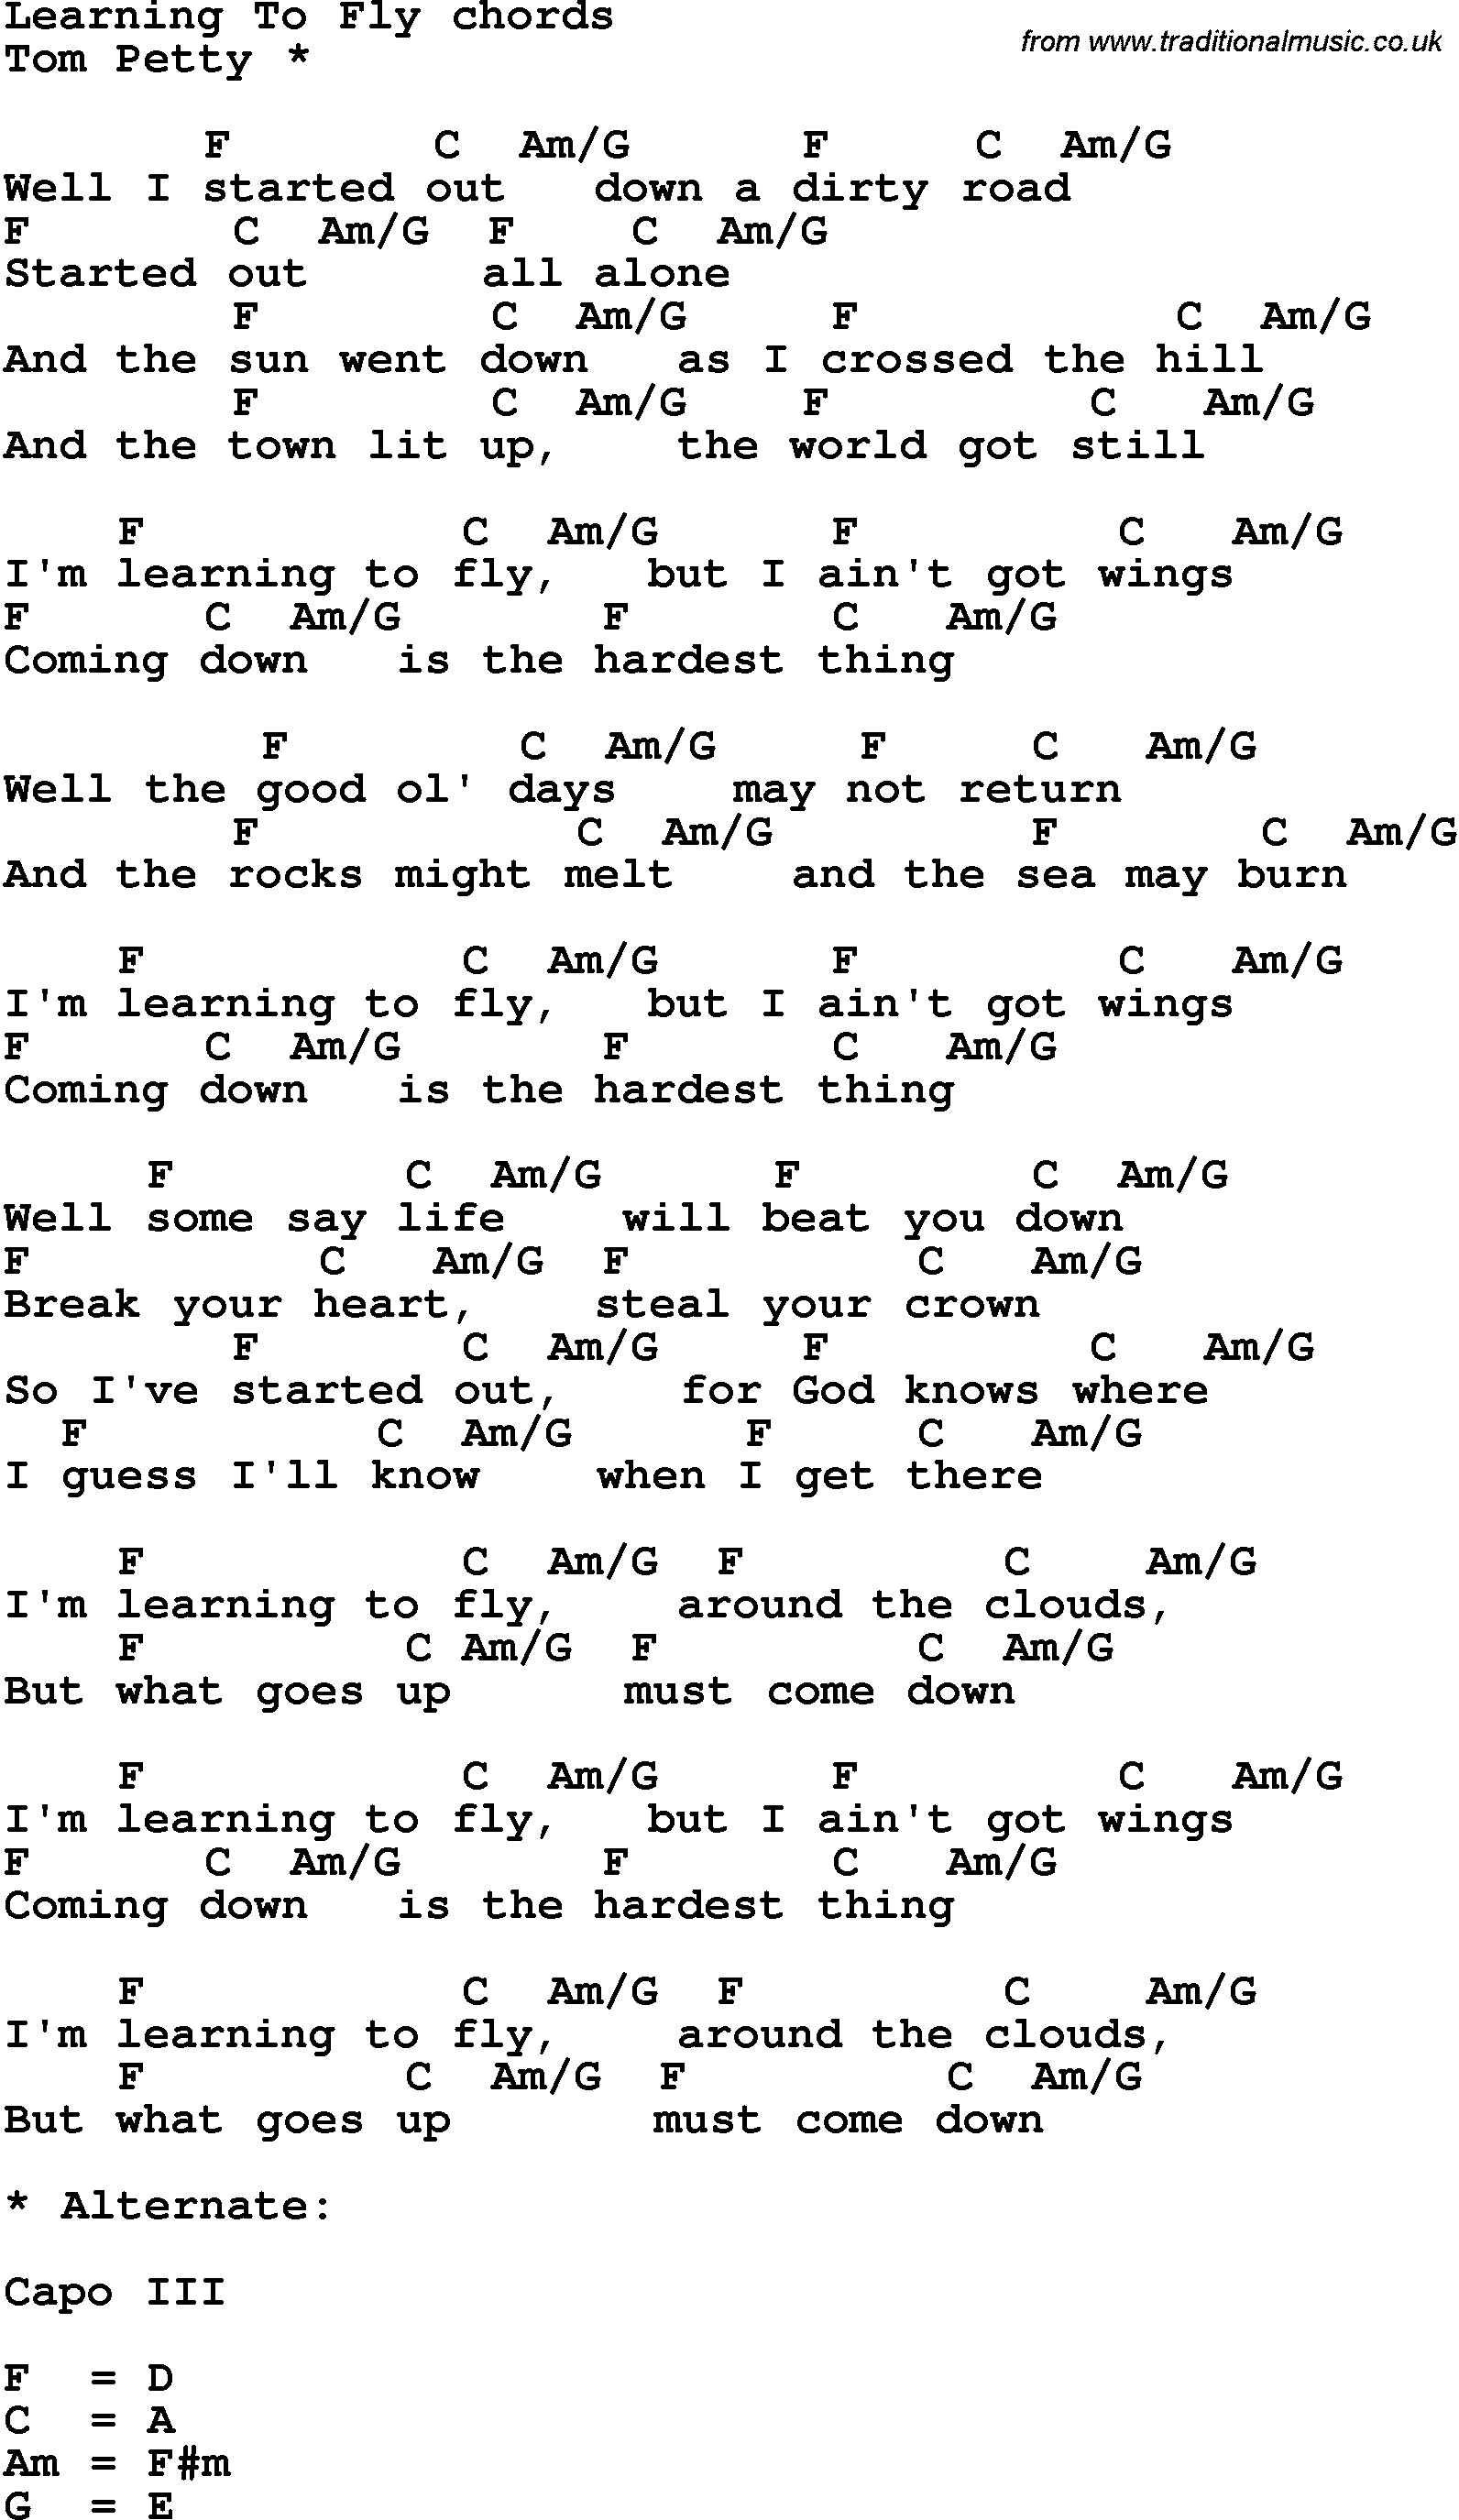 Song Lyrics with guitar chords for Learning To Fly - Tom Petty